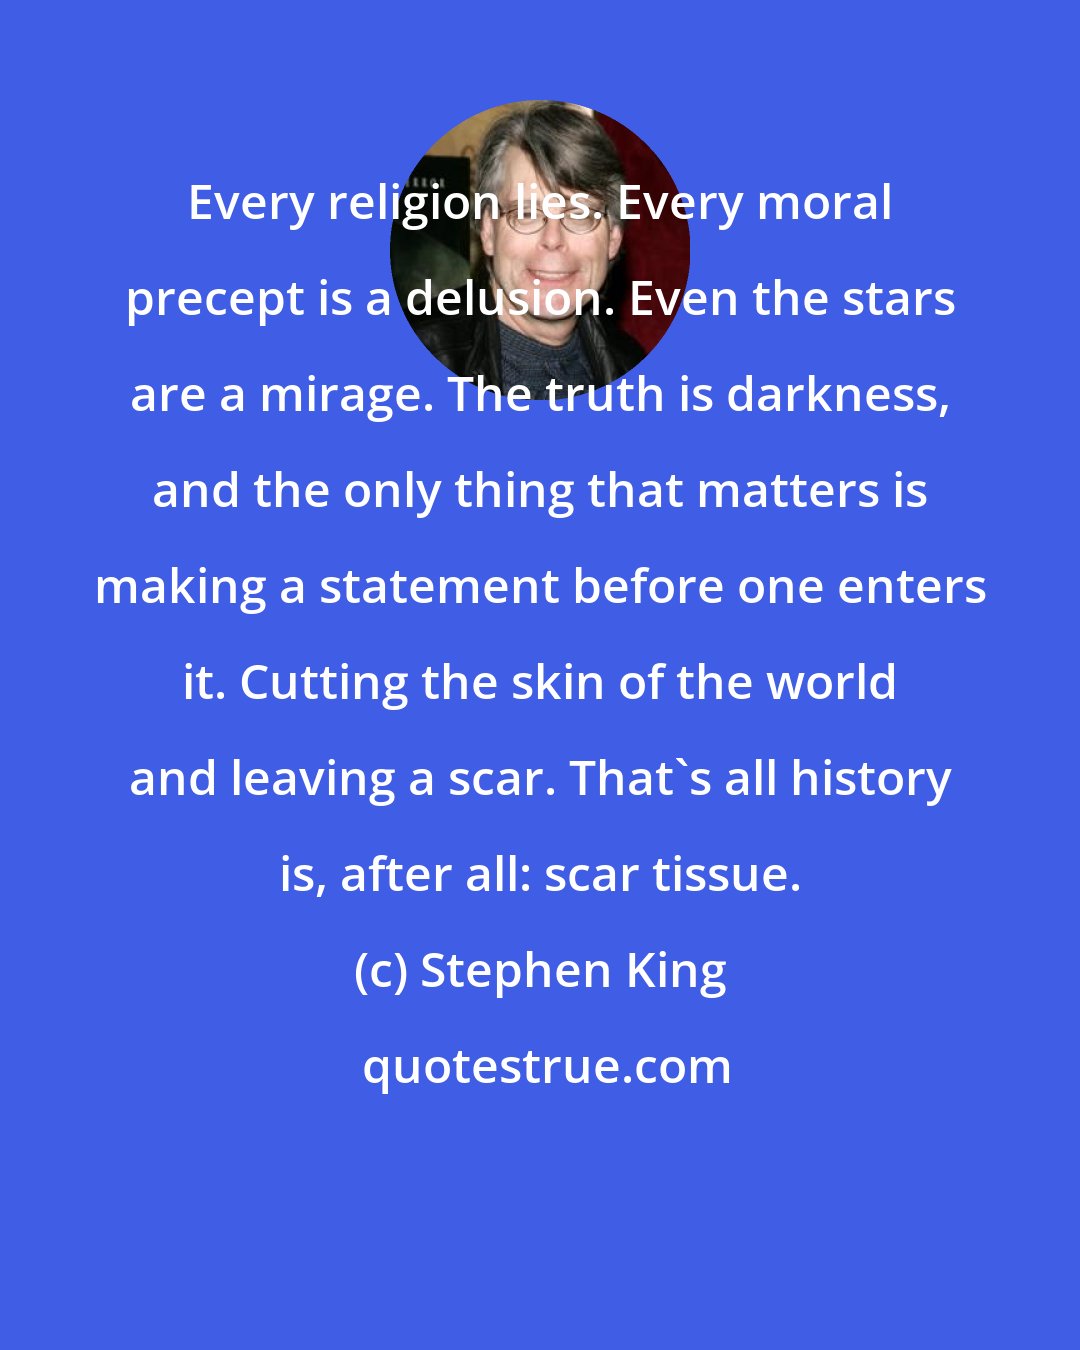 Stephen King: Every religion lies. Every moral precept is a delusion. Even the stars are a mirage. The truth is darkness, and the only thing that matters is making a statement before one enters it. Cutting the skin of the world and leaving a scar. That's all history is, after all: scar tissue.